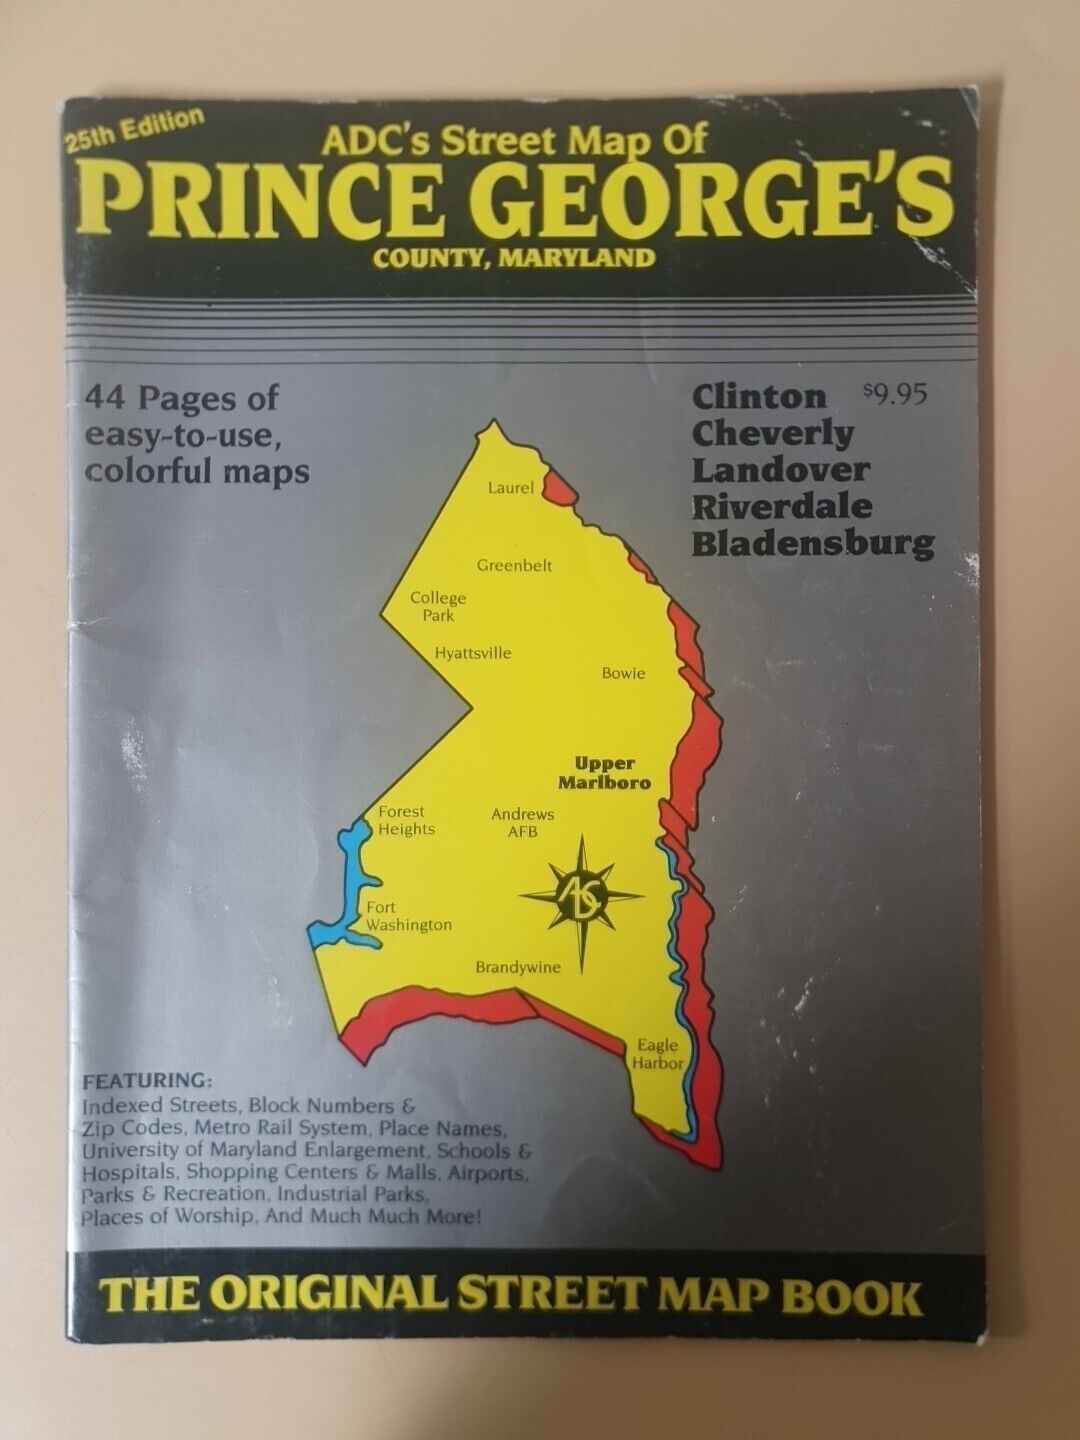 ADC's Street Map Of Prince George's County, Maryland (1994)